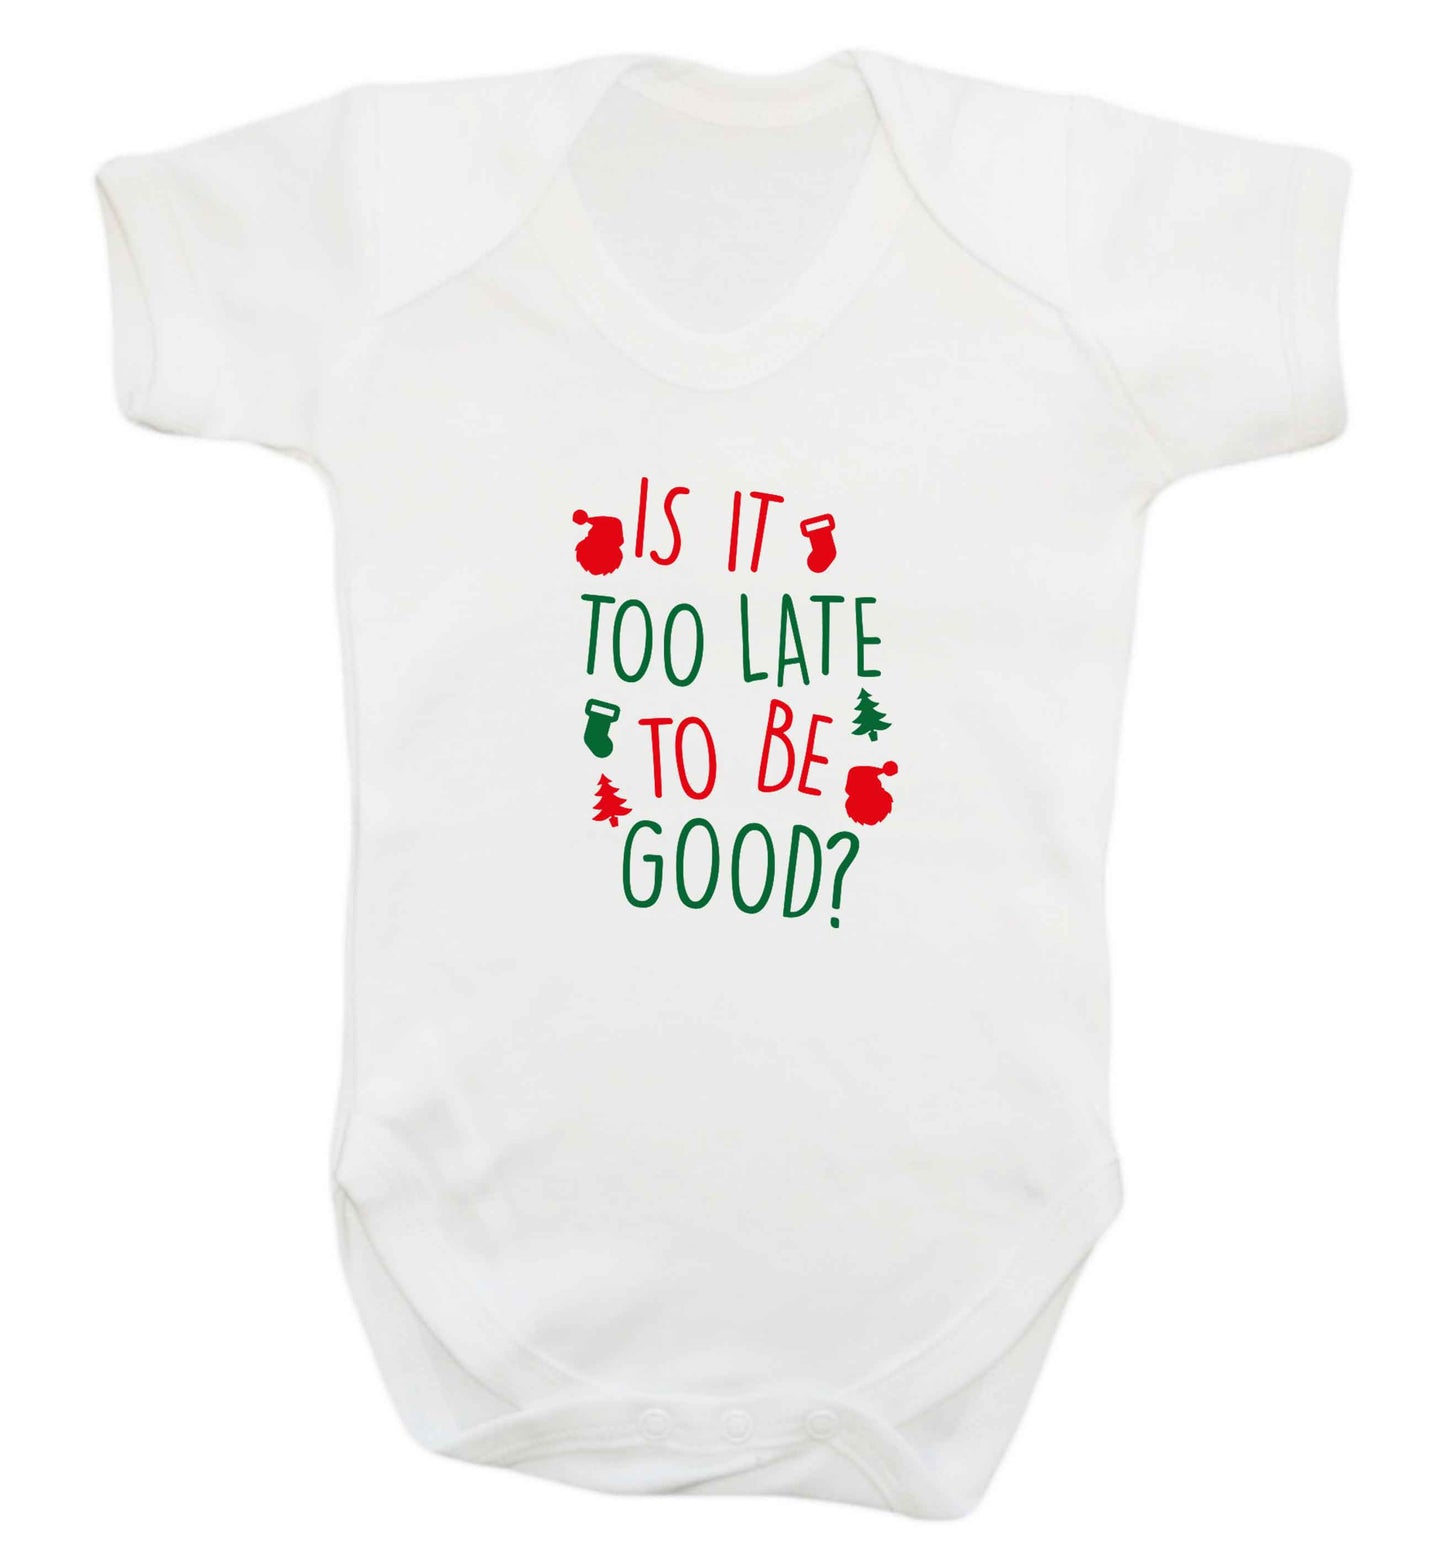 Too Late to be Good baby vest white 18-24 months